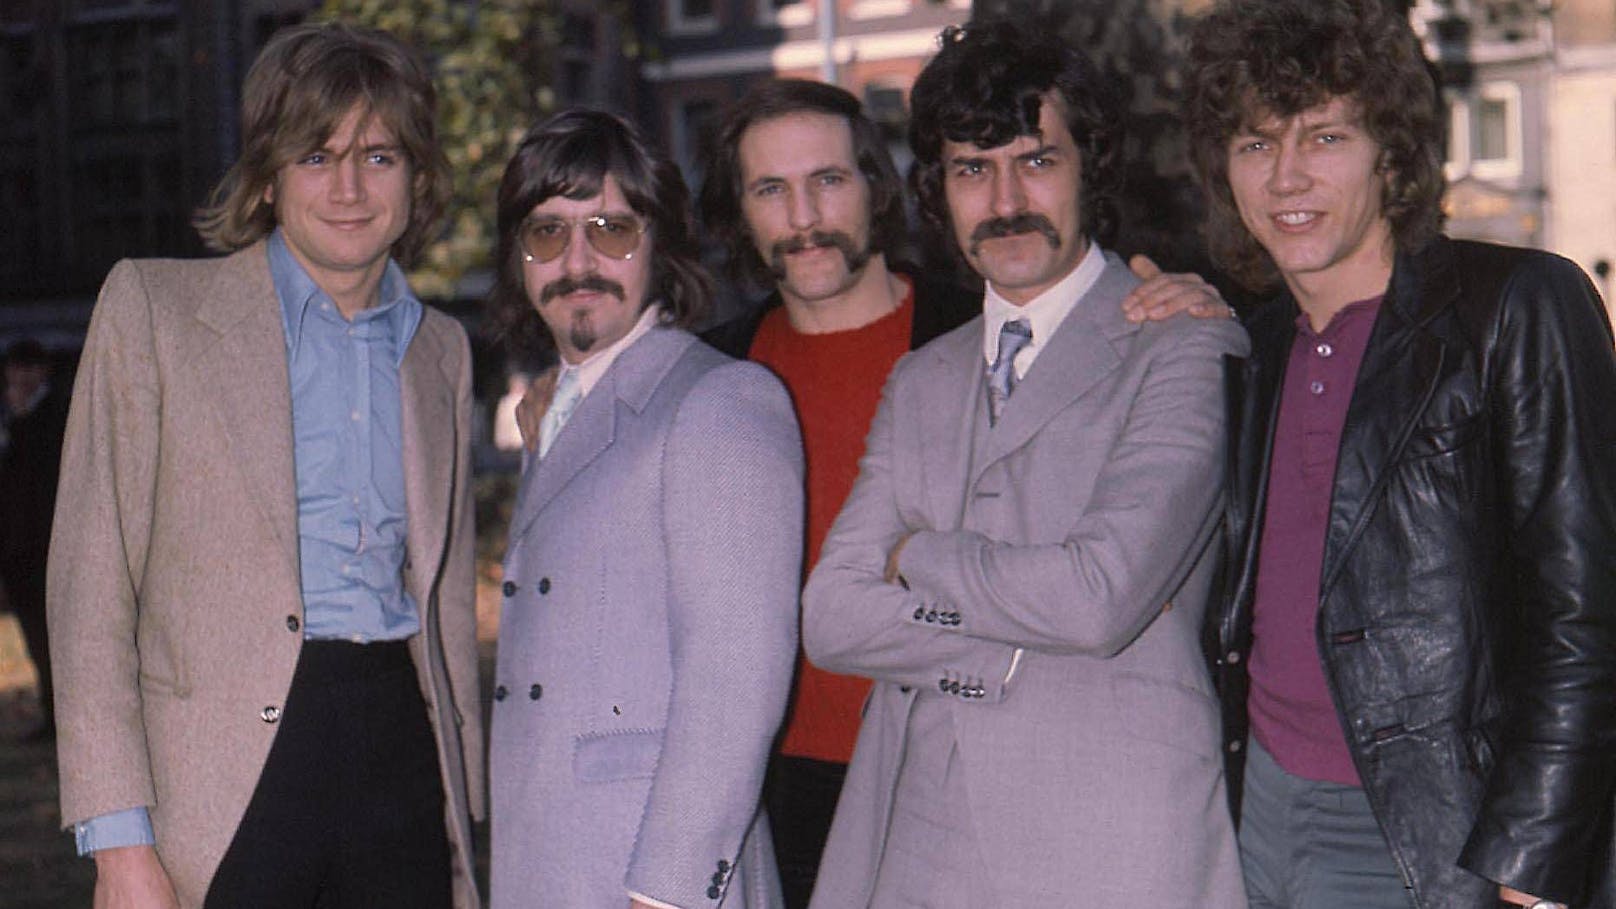 Mit Songs wie "Nights in White Satin", "Tuesday Afternoon (Forever Afternoon)" und "I’m Just a Singer (In a Rock and Roll Band)" feierte Pinder (Mitte) mit "<strong>The Moody Blues</strong>" von 1964 bis 1979 Erfolge.